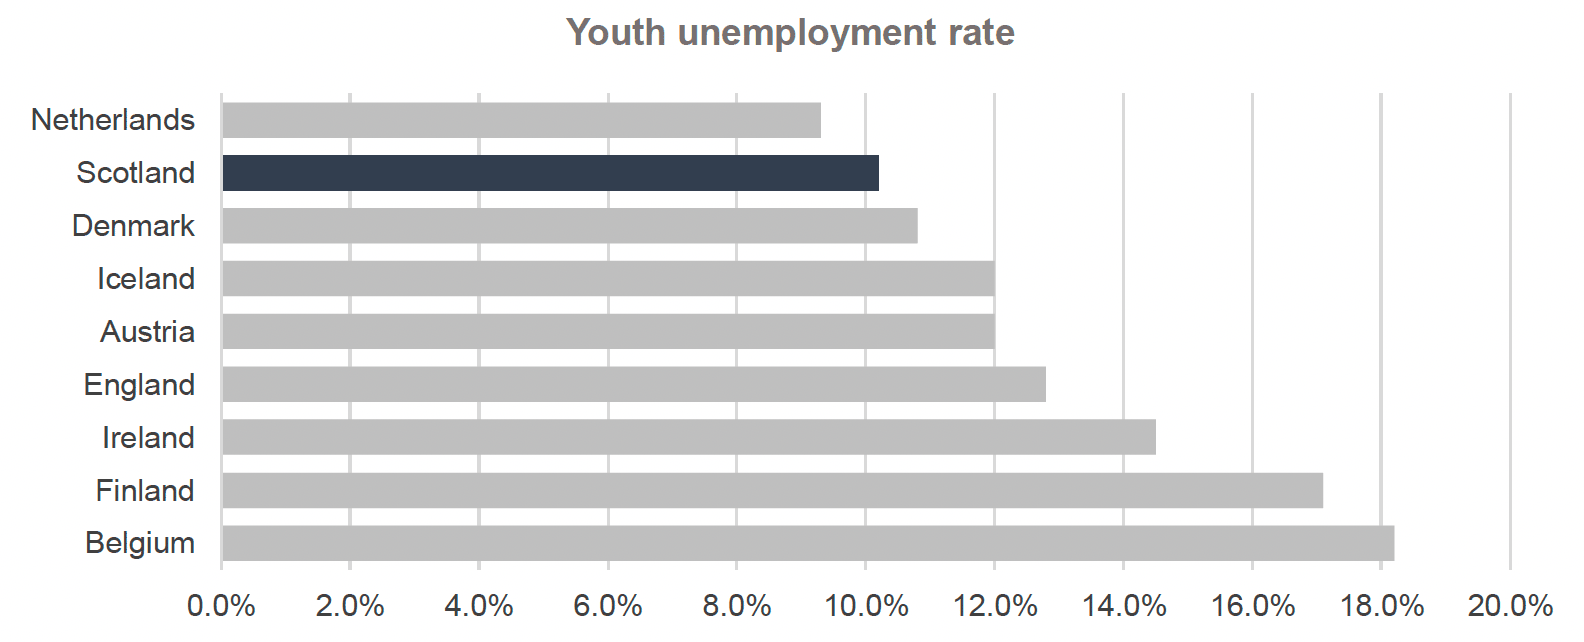 Graph depicts the youth unemployment rate observed in countries included in the International Framework in 2021, in a bar chart, highlighting Scotland’s figure in a different colour. Scotland ranks second out of nine countries. In the Netherlands, the youth unemployment rate was 9.3%. In Scotland, the youth unemployment rate was 10.2%. In Denmark, the youth unemployment rate was 10.8%. In Iceland, the youth unemployment rate was 12%. In Austria, the youth unemployment rate was 12%. In England, the youth unemployment rate was 12.8%. In Ireland, the youth unemployment rate was 14.5%. In Finland, the youth unemployment rate was 17.1%. Finally in Belgium, the youth unemployment rate was 18.2%.